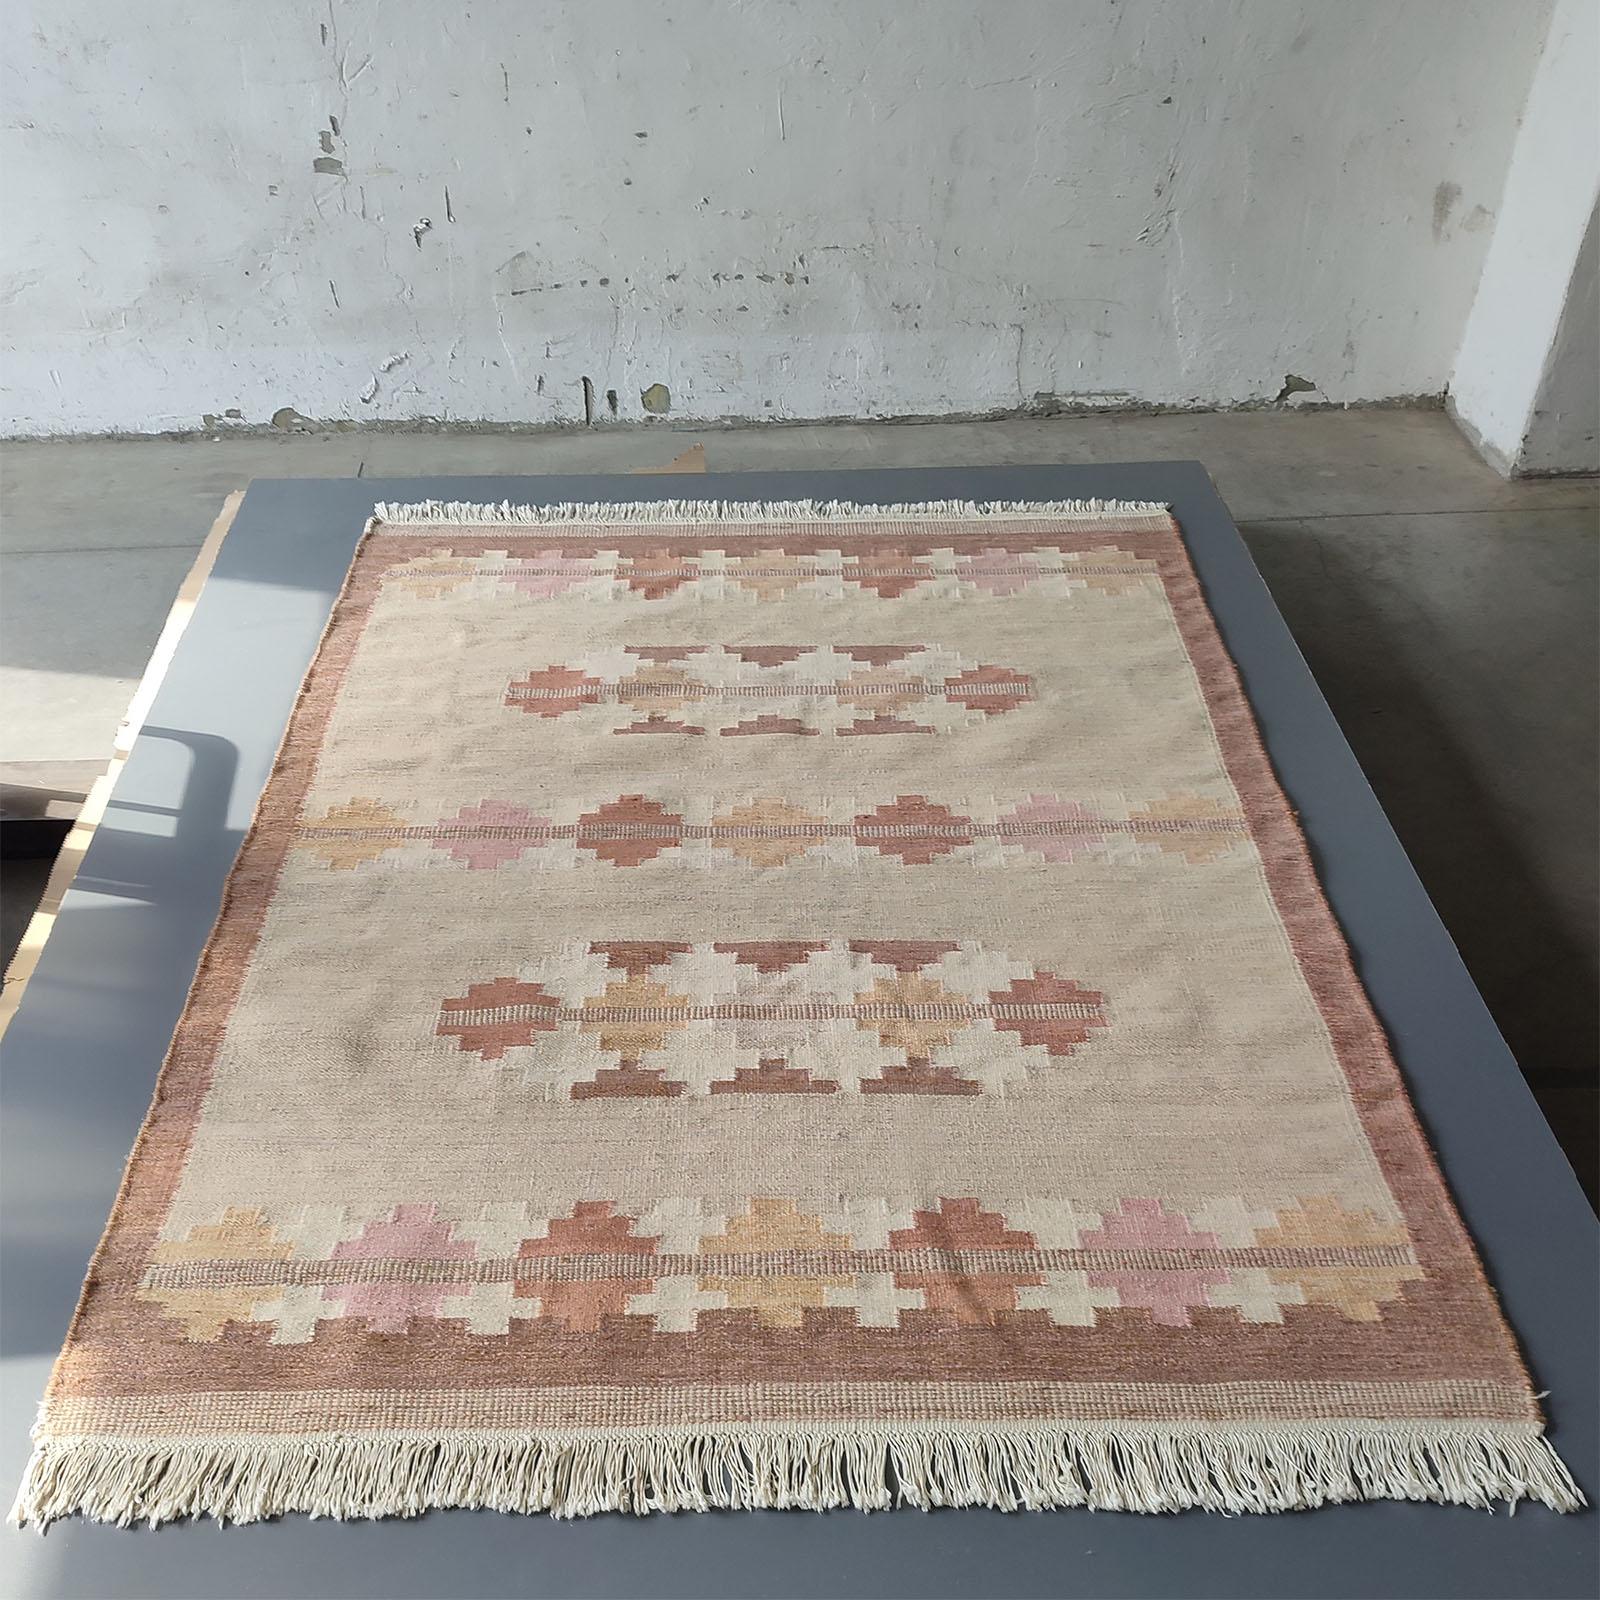 Genuine vintage Scandinavian Kilim rug. Rare find and never seen in this color pallette.
The color palette comprises of gentle shades of beige, rusty faded red, brown and pink, against a neutral beige, in complementary geometric shapes that